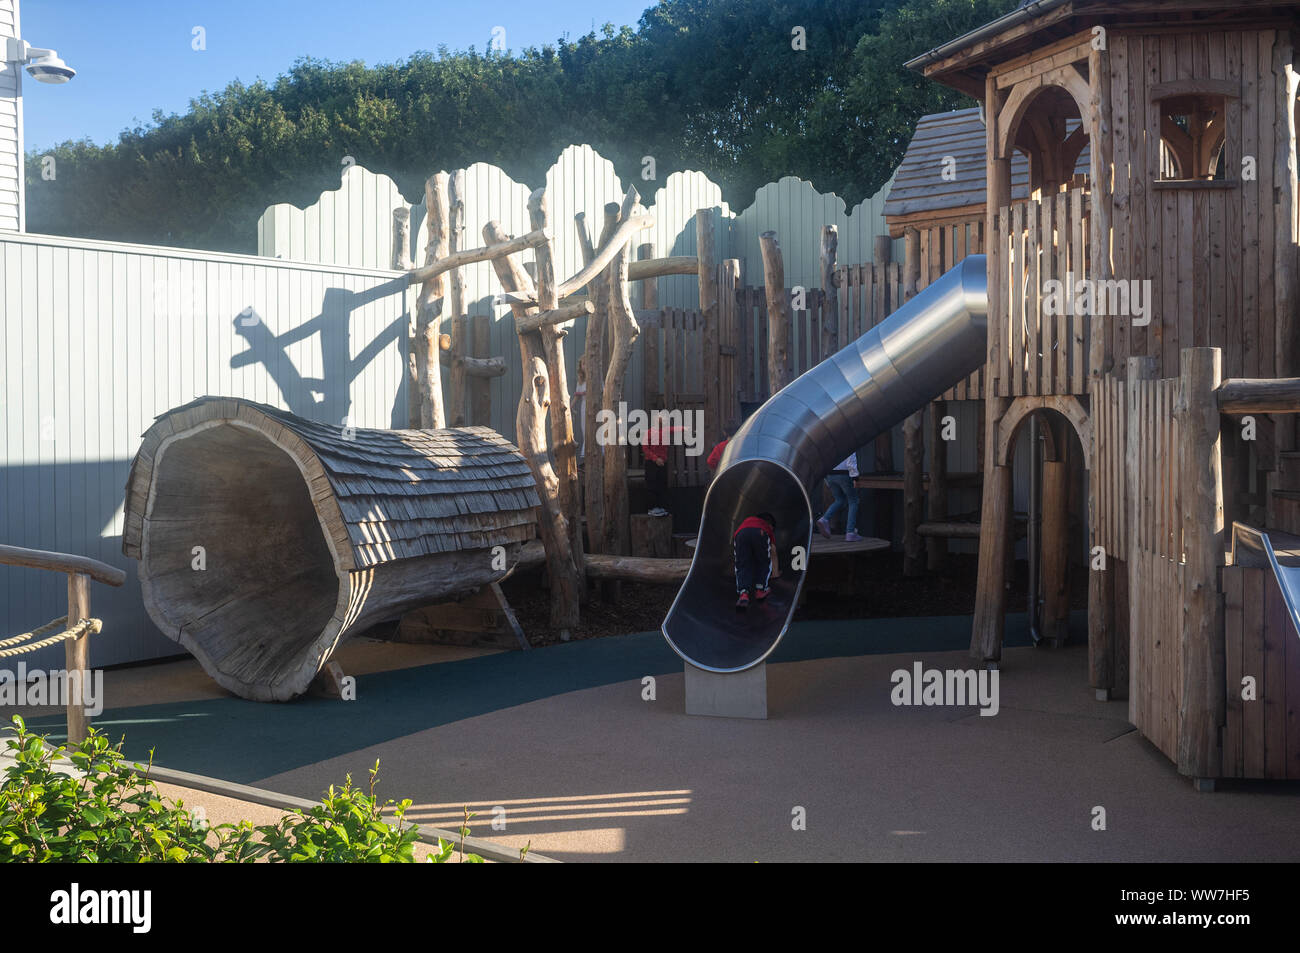 Children's Play area at Bicester Village, Oxfordshire, UK. The playground is mainly made from wood, an eco sustainable product. Stock Photo